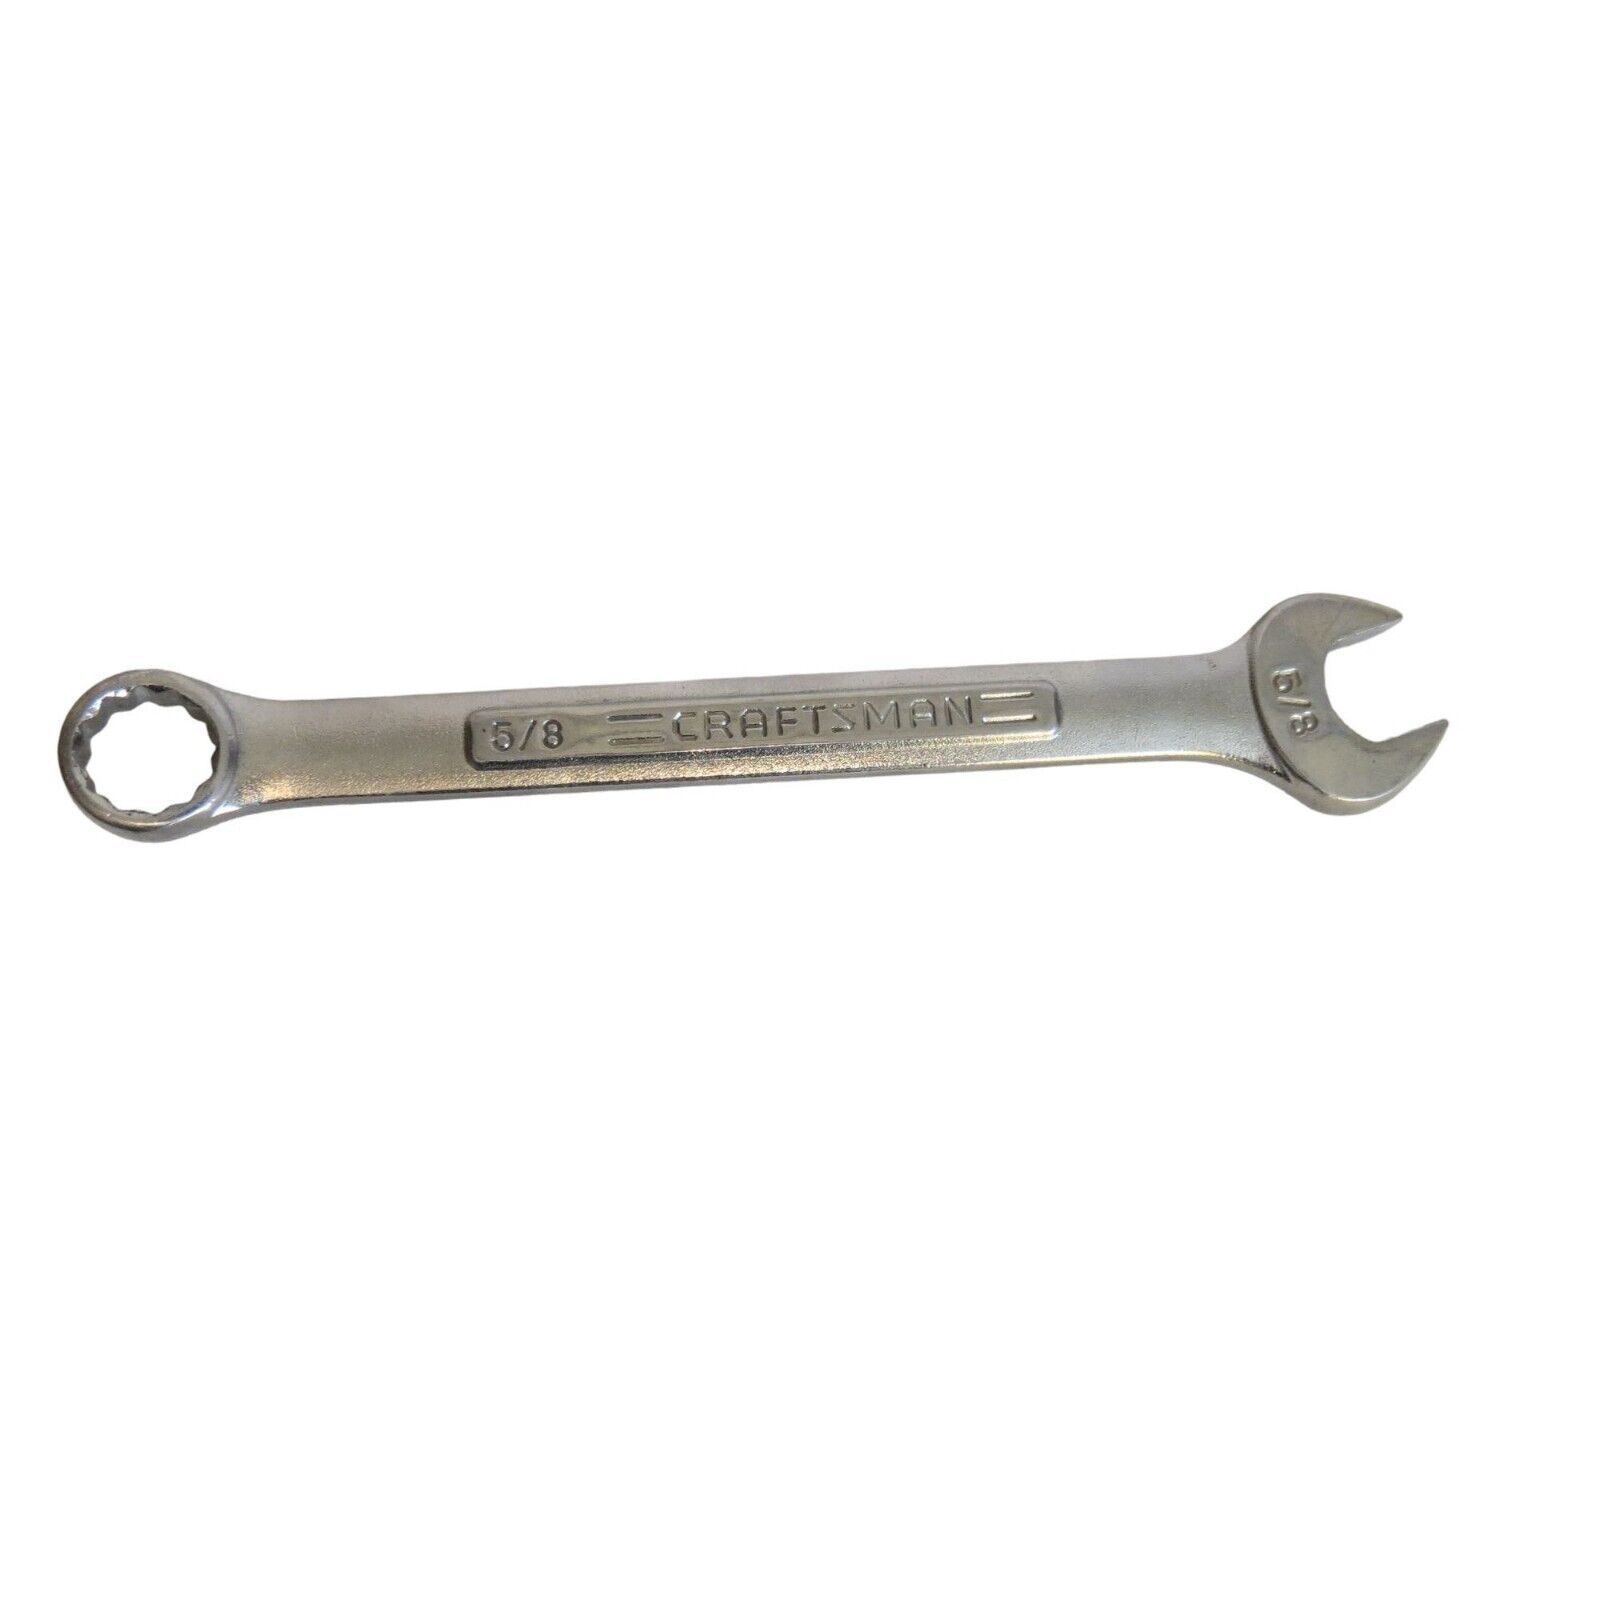 Craftsman 5/8 In. Combination Wrench SAE Vintage VA 44697 USA